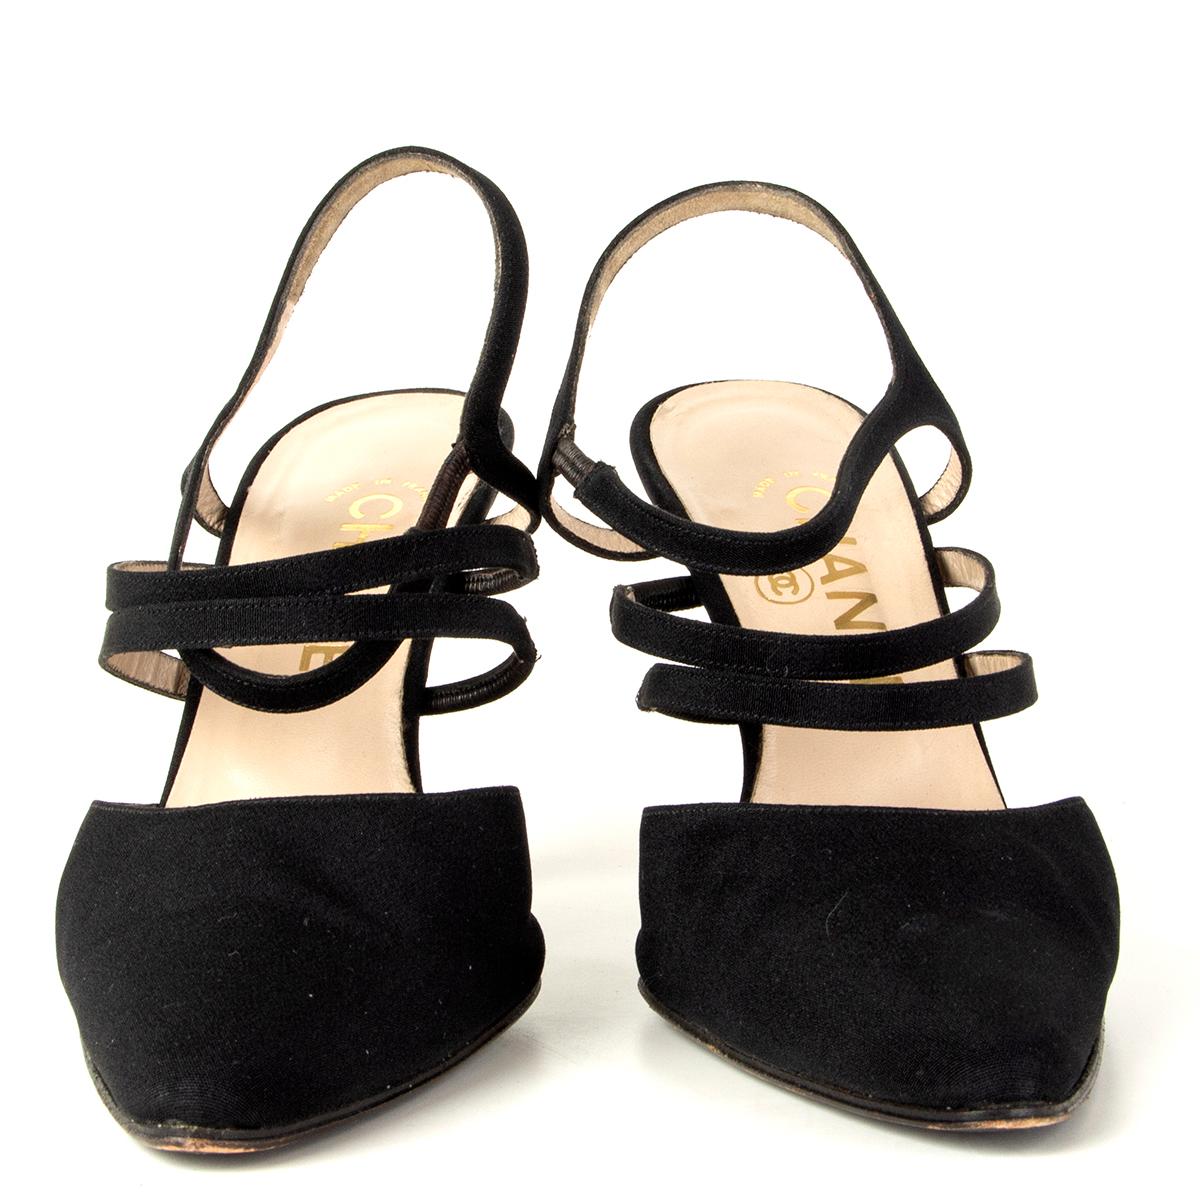 100% authentic Chanel Vintage strappy mules in black grosgrain fabric. Have been worn and are in excellent condition.

Measurements
Imprinted Size	38
Shoe Size	38
Inside Sole	25cm (9.8in)
Width	7cm (2.7in)
Heel	9cm (3.5in)

All our listings include